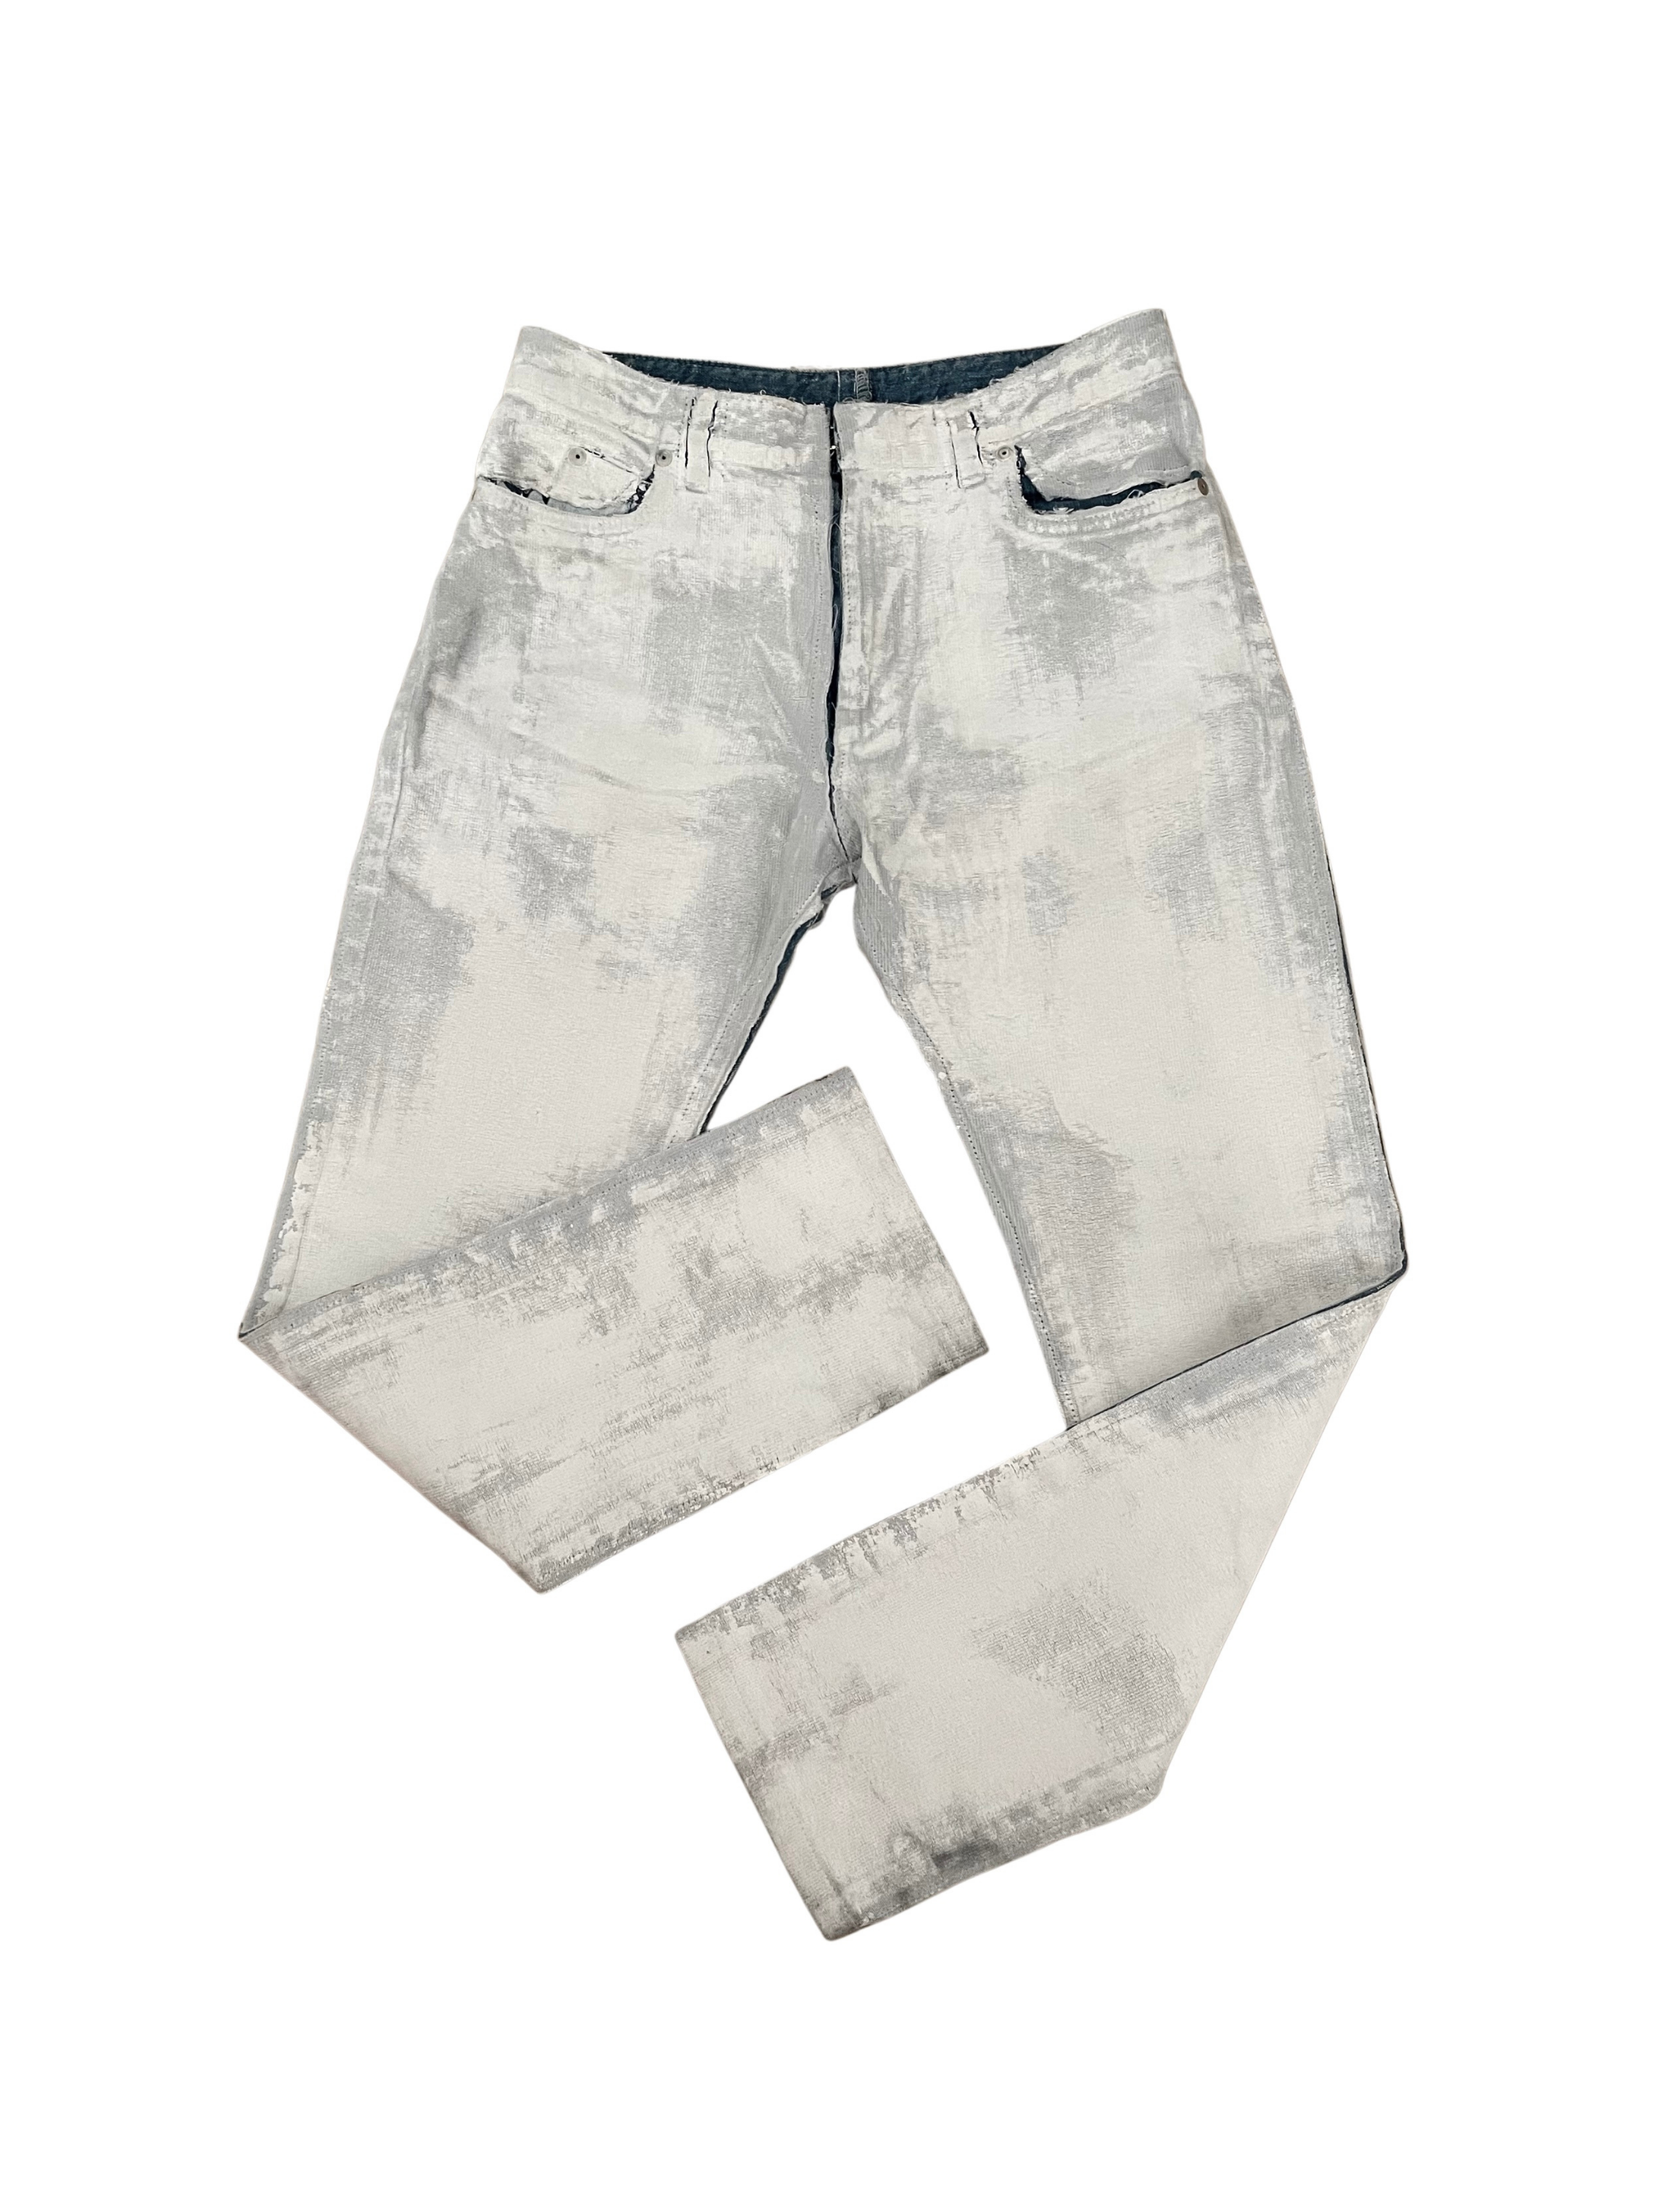 MAISON MARGIELA PAINTED JEANS – The Archive Gallery